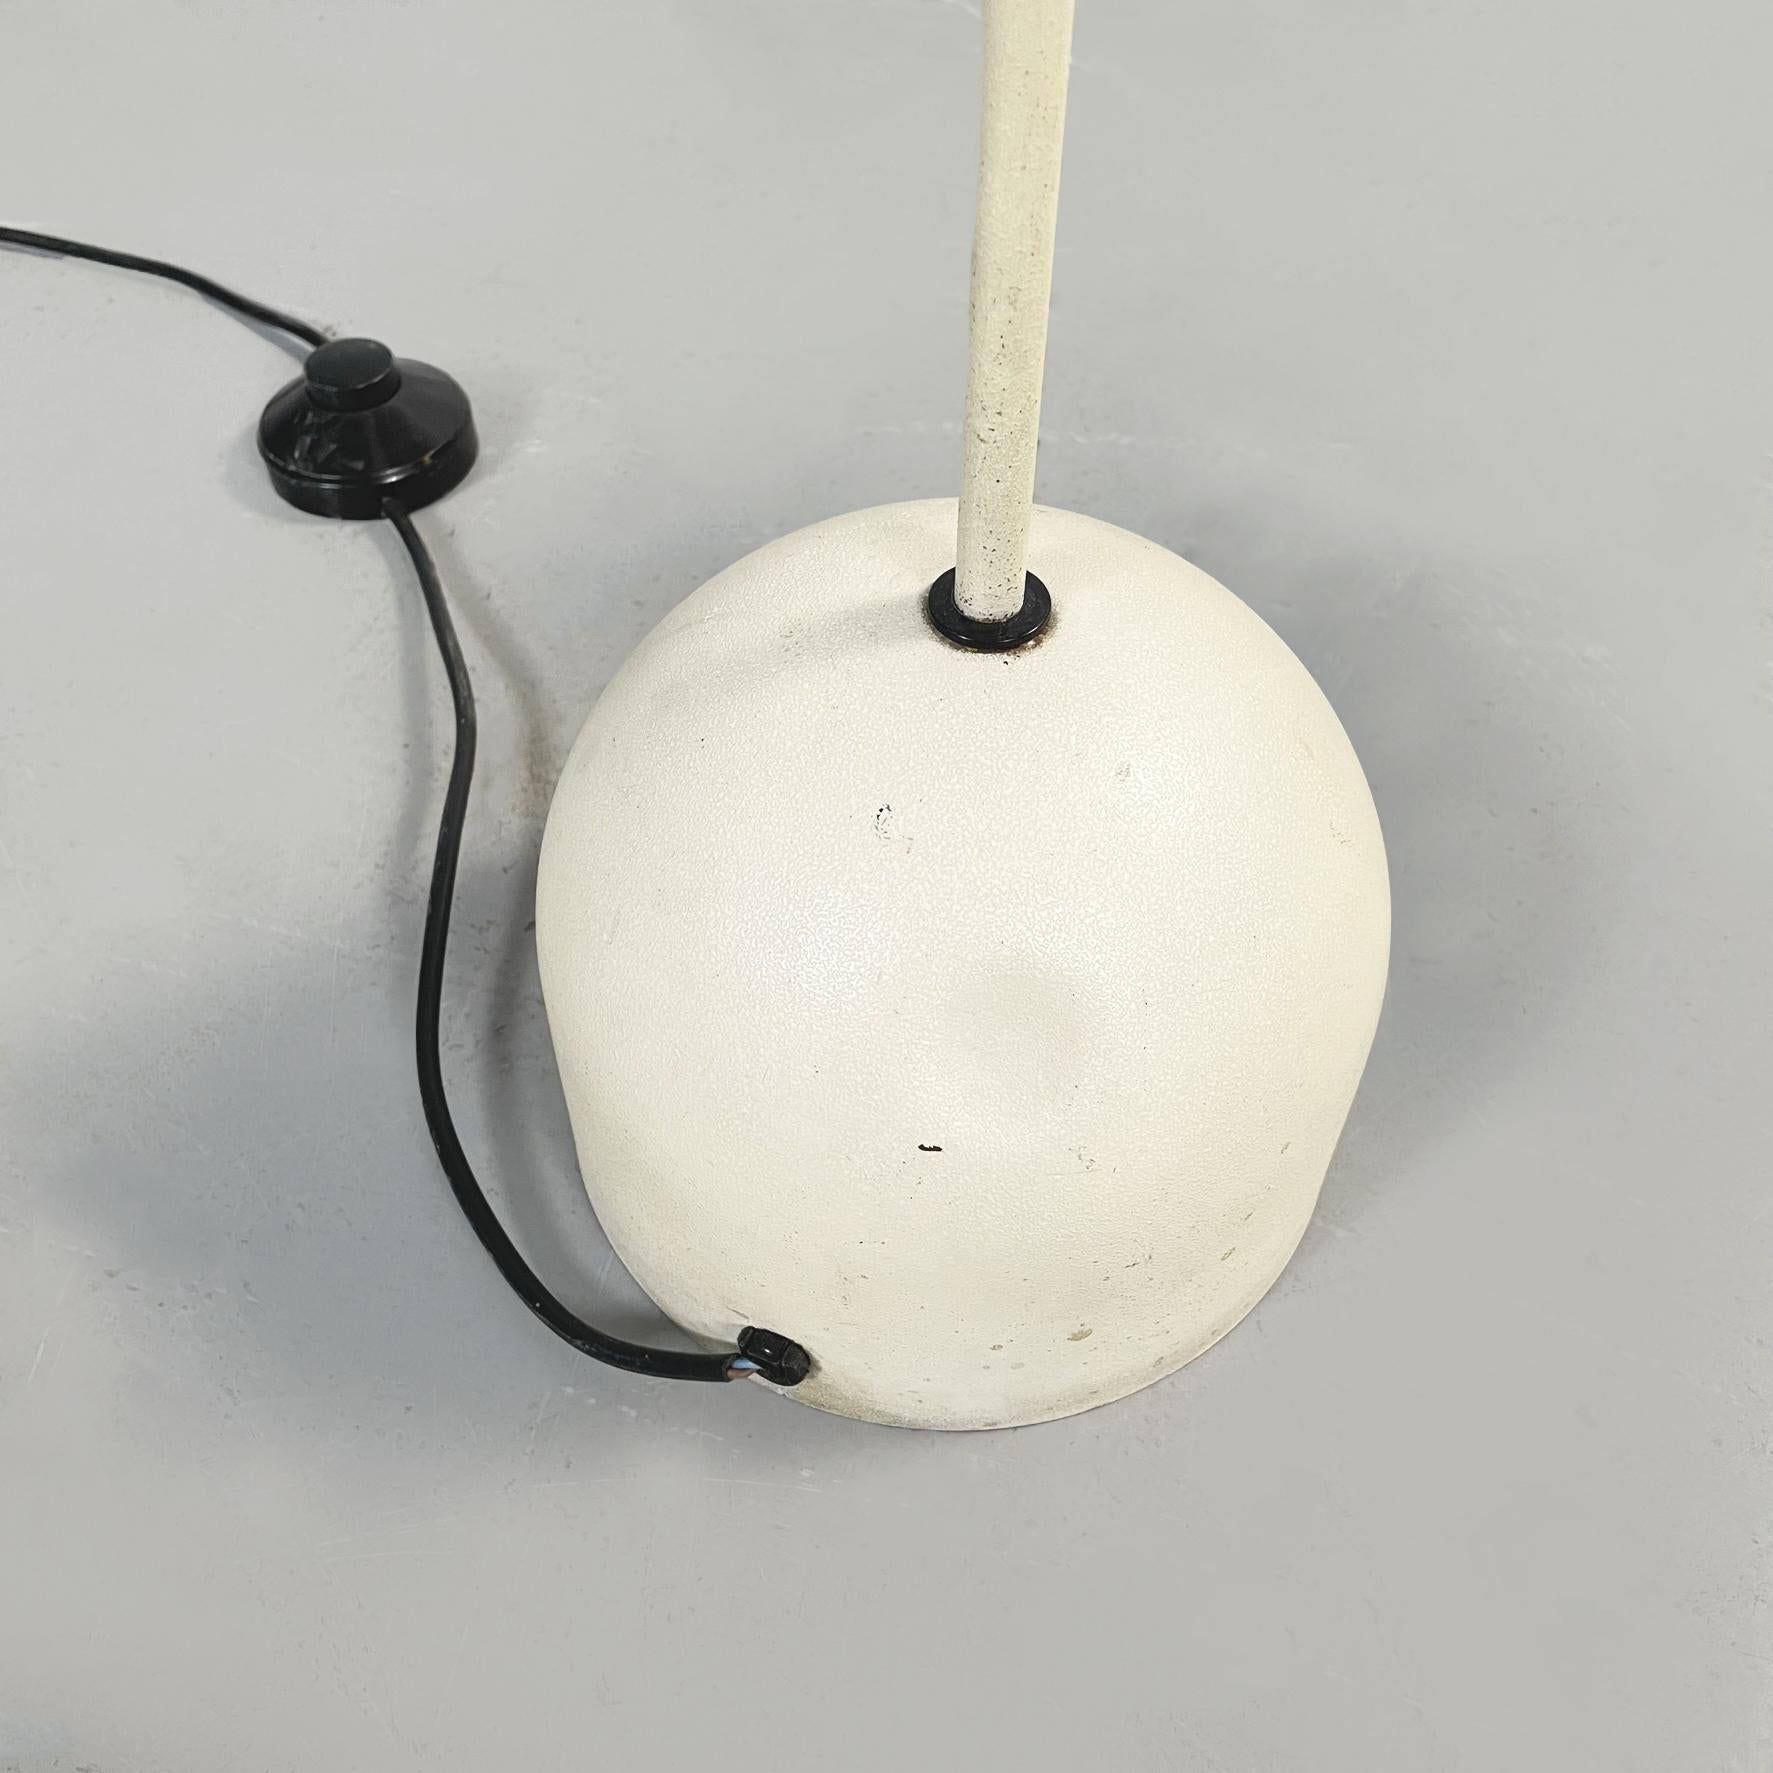 Italian Mid-Century Modern Floor Lamp in White Fabric and Metal, 1980s For Sale 6